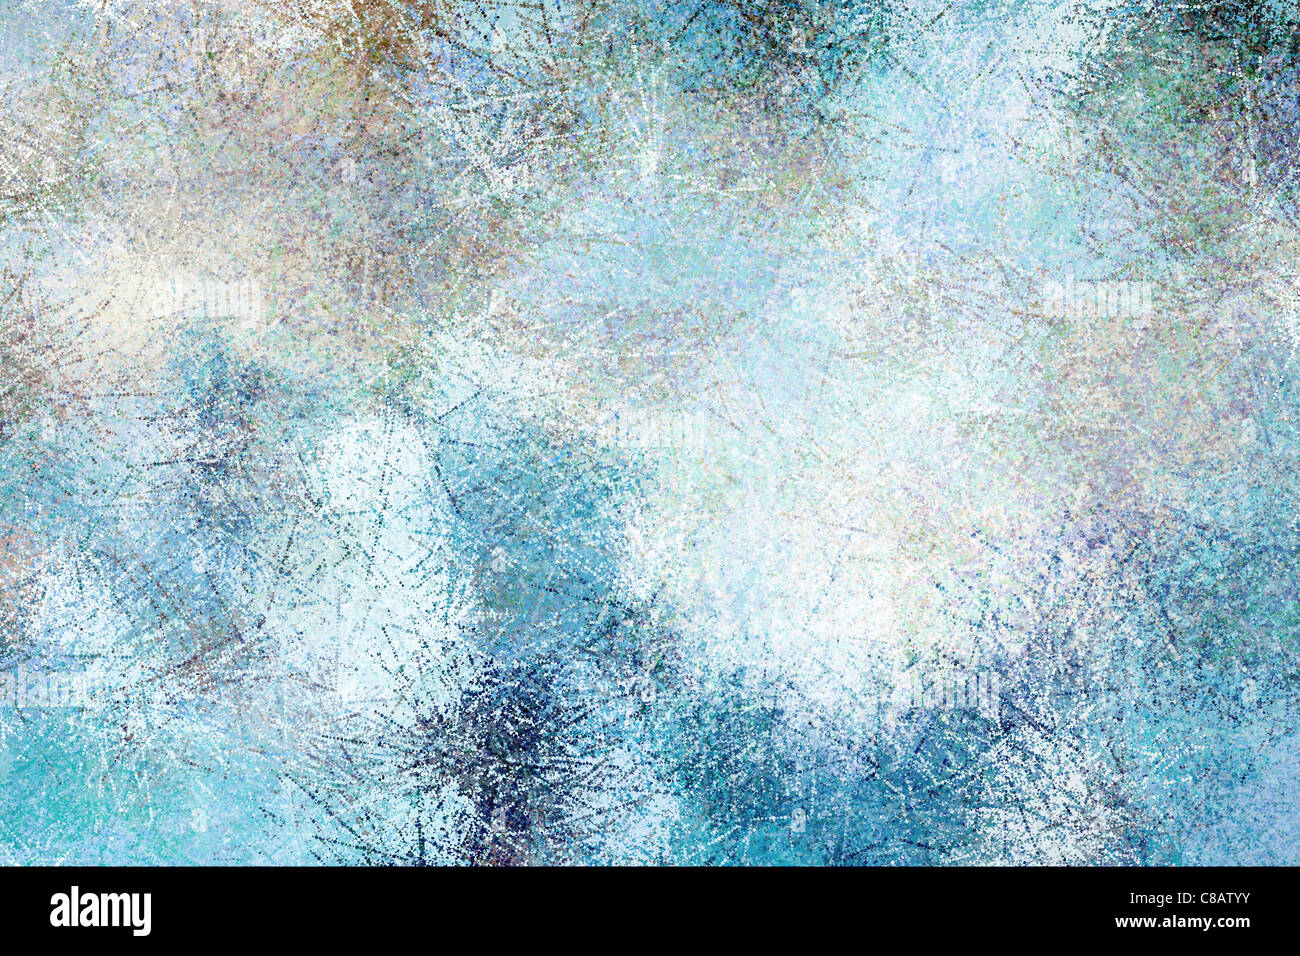 Abstract background digital painting of splattered dots Stock Photo